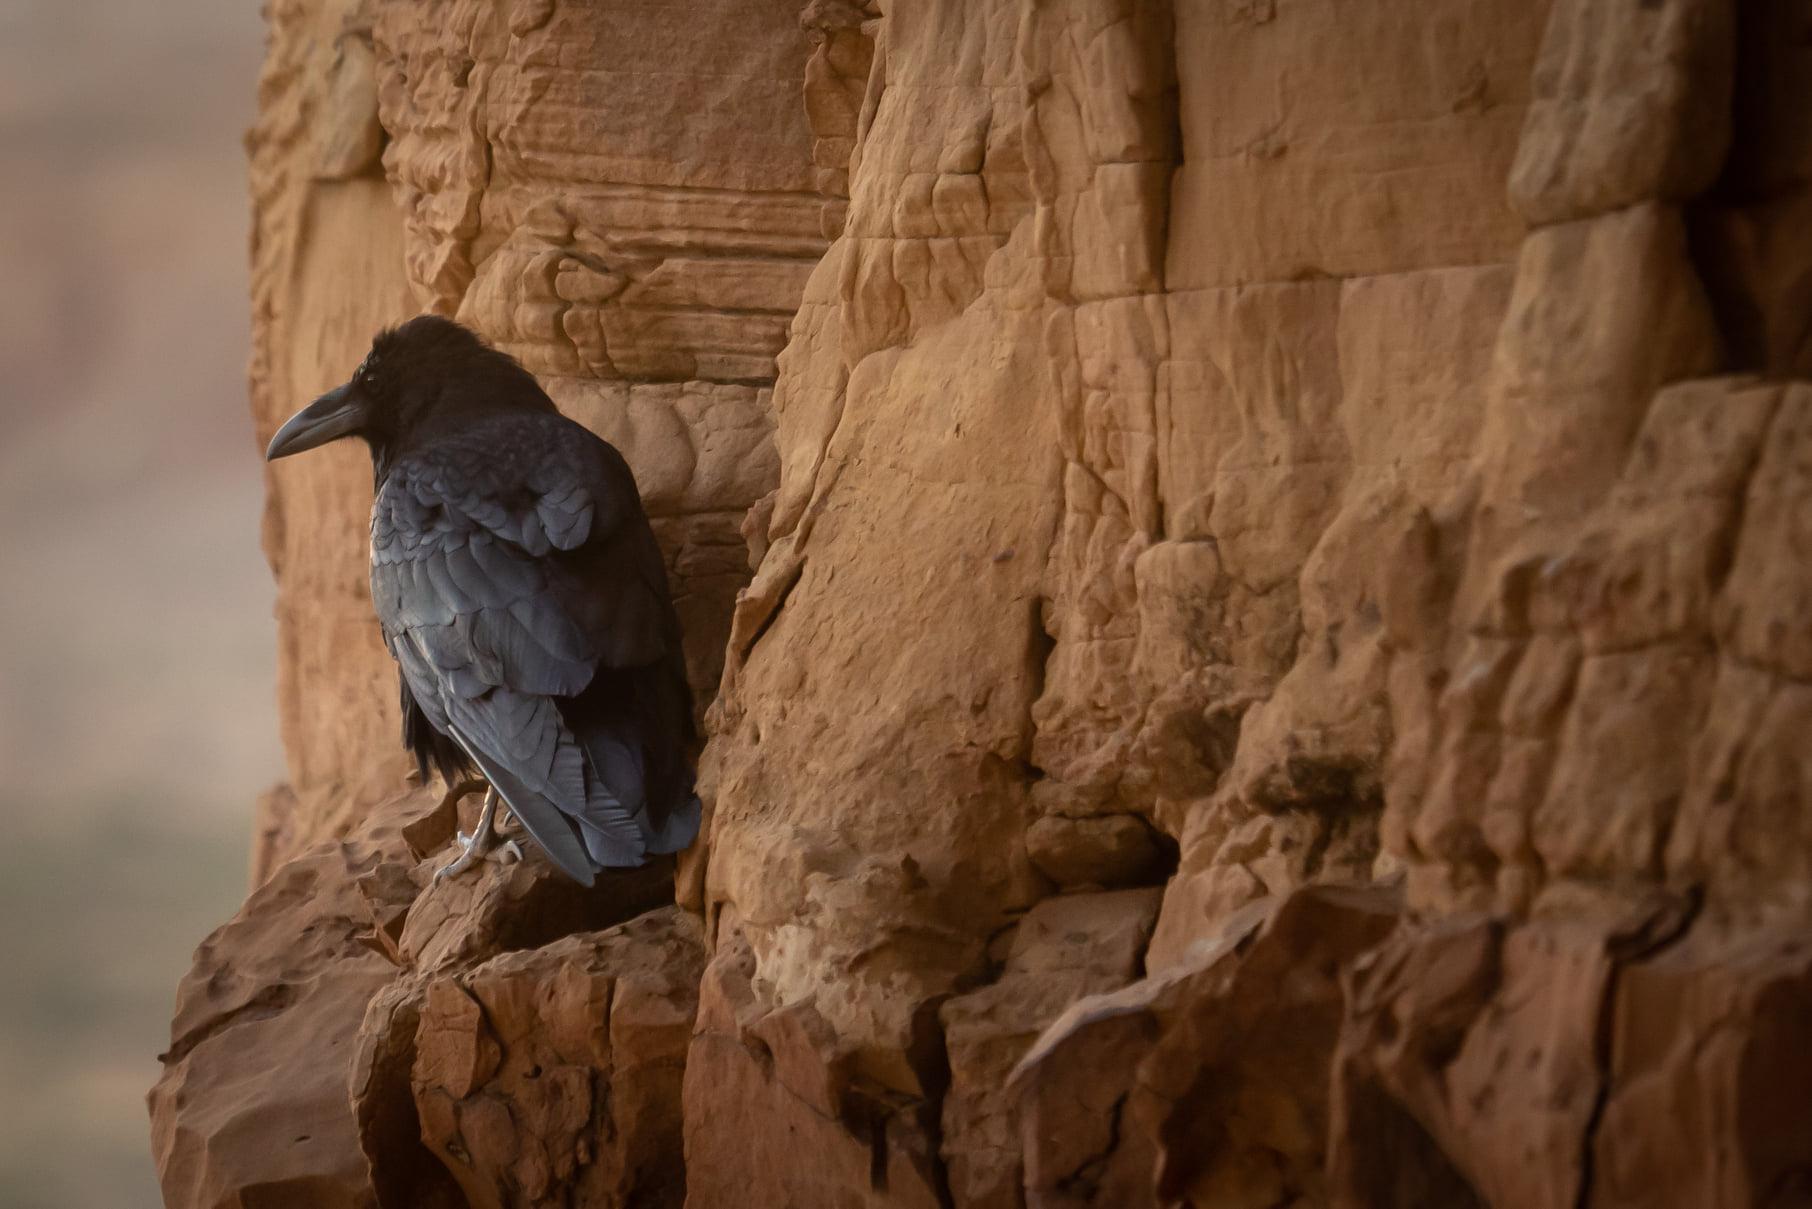 A raven perched on the side of a canyon wall.